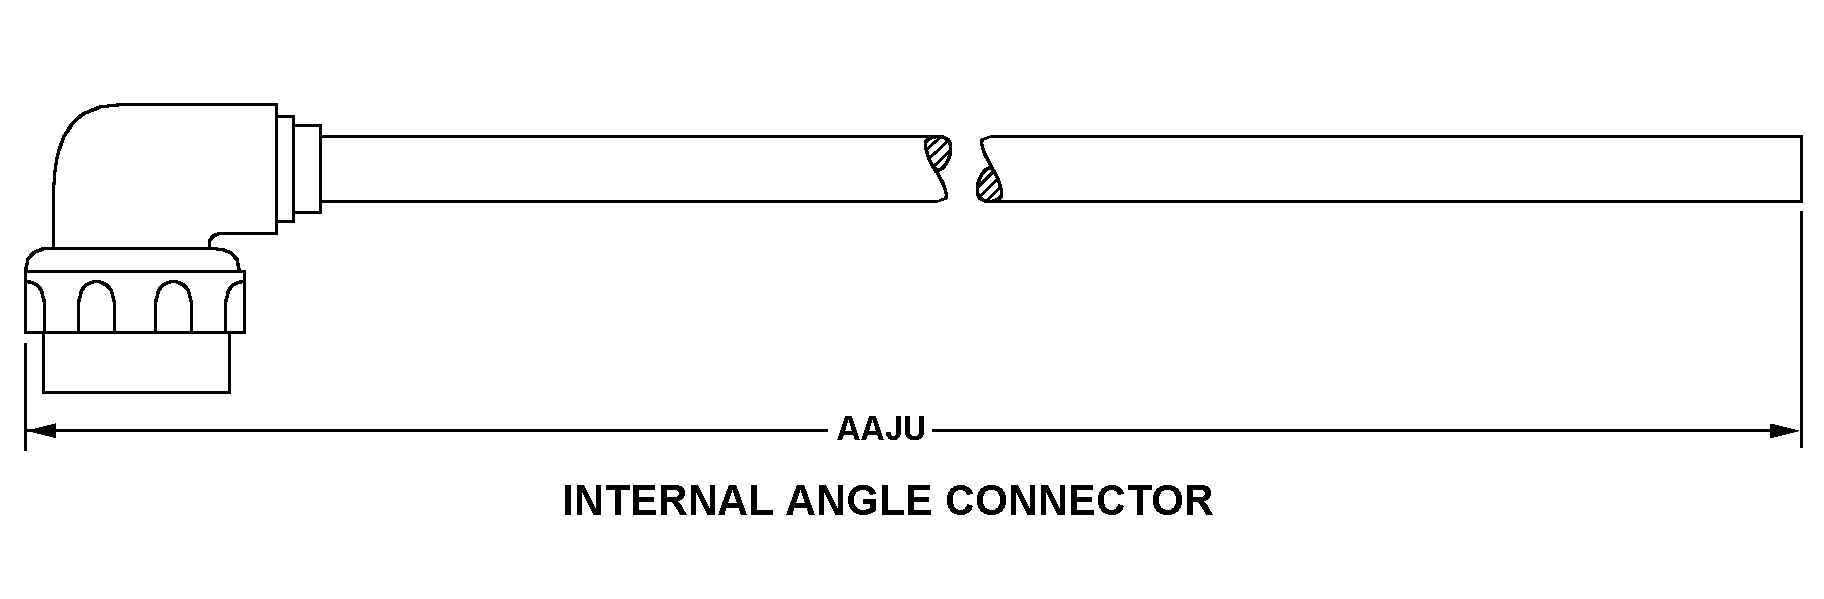 INTERNAL ANGLE CONNECTOR style nsn 5995-00-853-6405